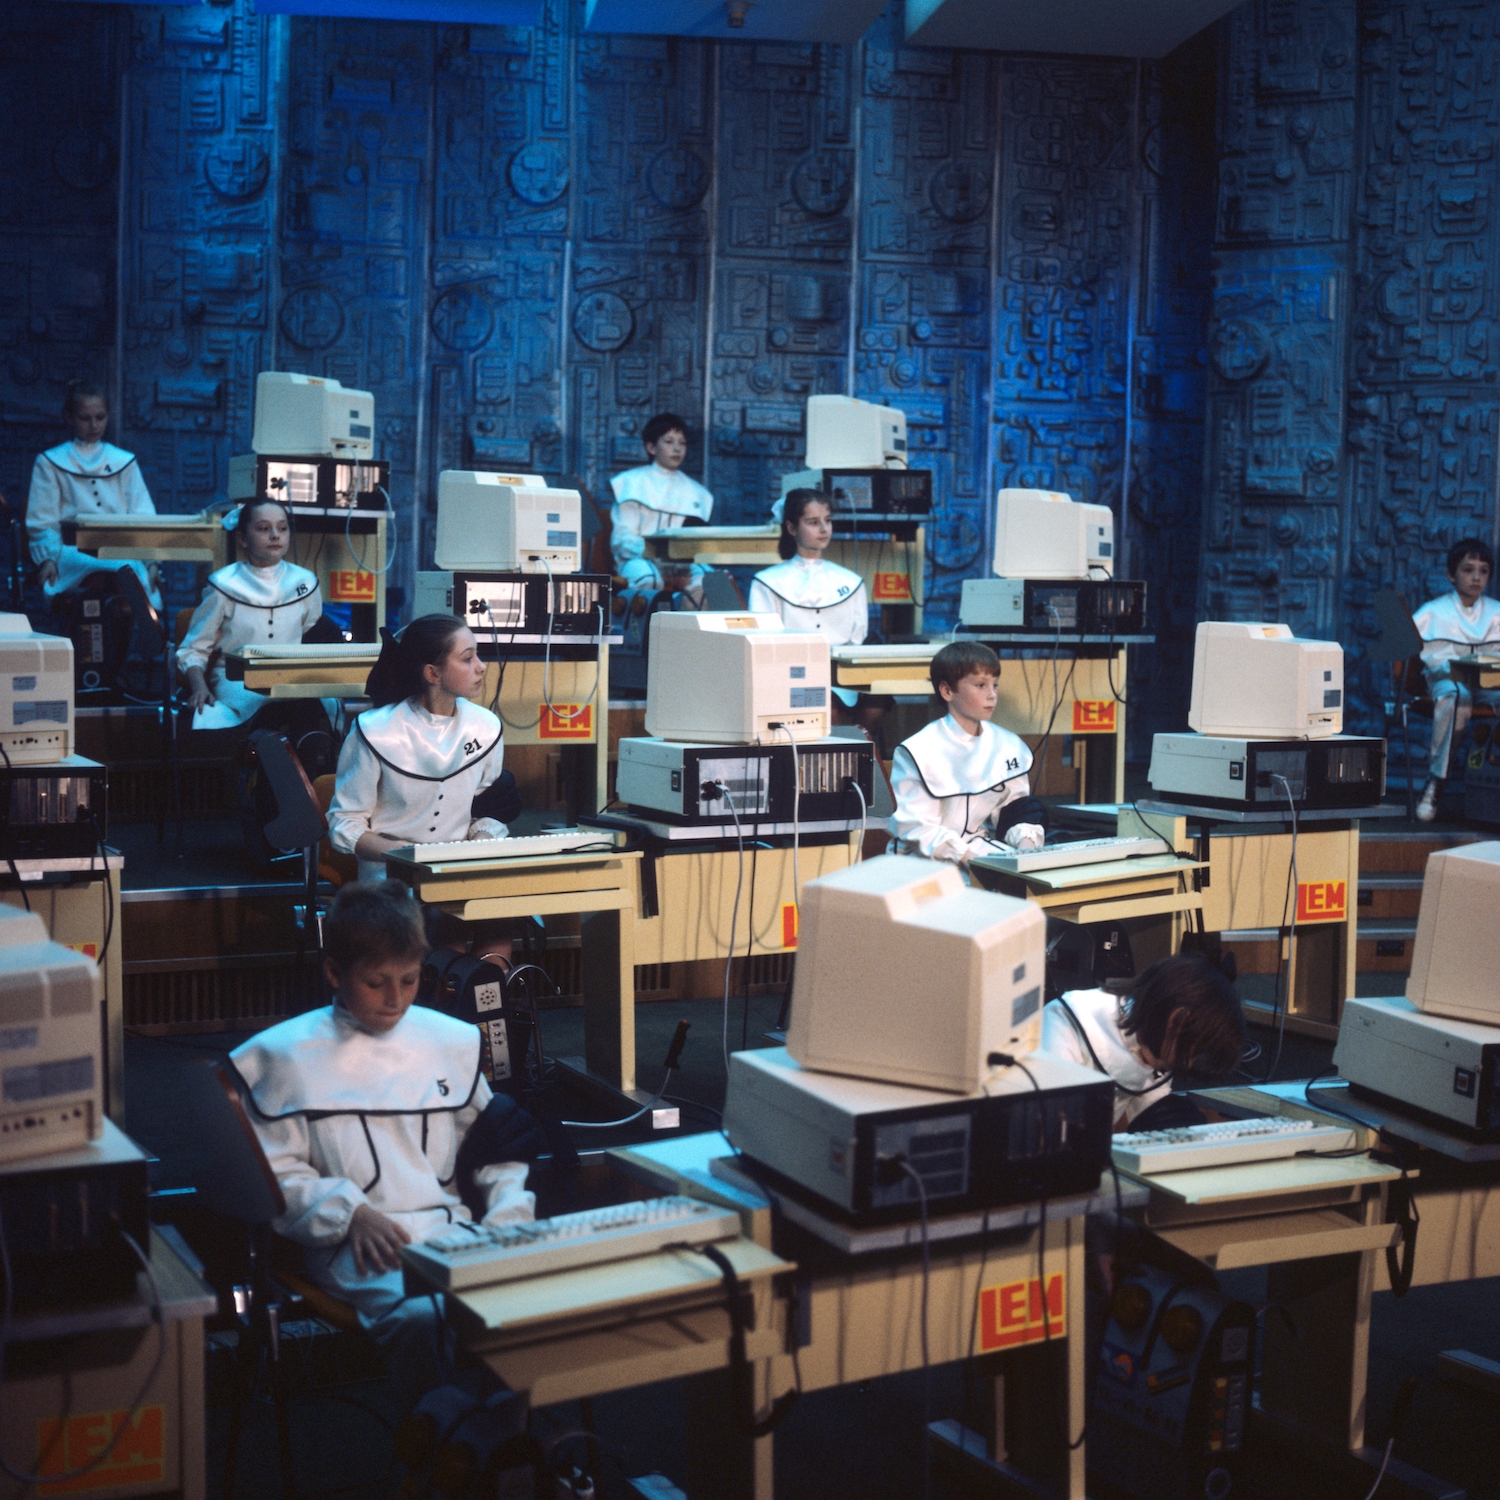 Computer room equipped with Mazovia computers, from the film Pan Kleks w kosmosie (Mr. Blot in Space, Krzysztof Gradowski, 1988). Image: Polish National Film Archive